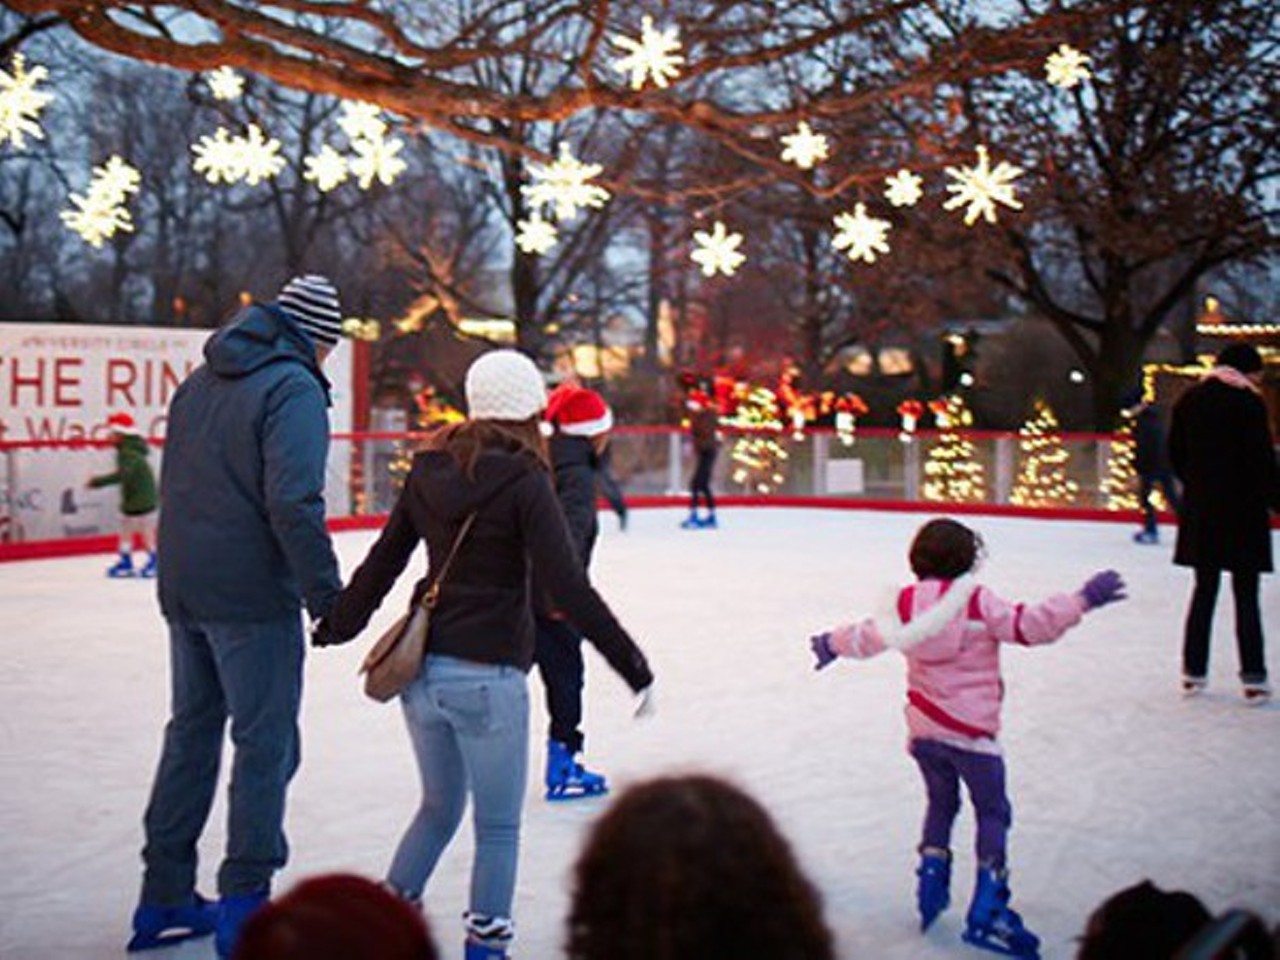 Ice Skate at Wade Oval
Starting this month, one of the most cliched date pastimes returns to Cleveland. Ice skating outdoors, under the twinkle of fairy lights and snow drifts. Wade Oval at University Circle offers free skating for all with $3 skate rentals, and it stays open through March. (Photo courtesy of Scene archives)